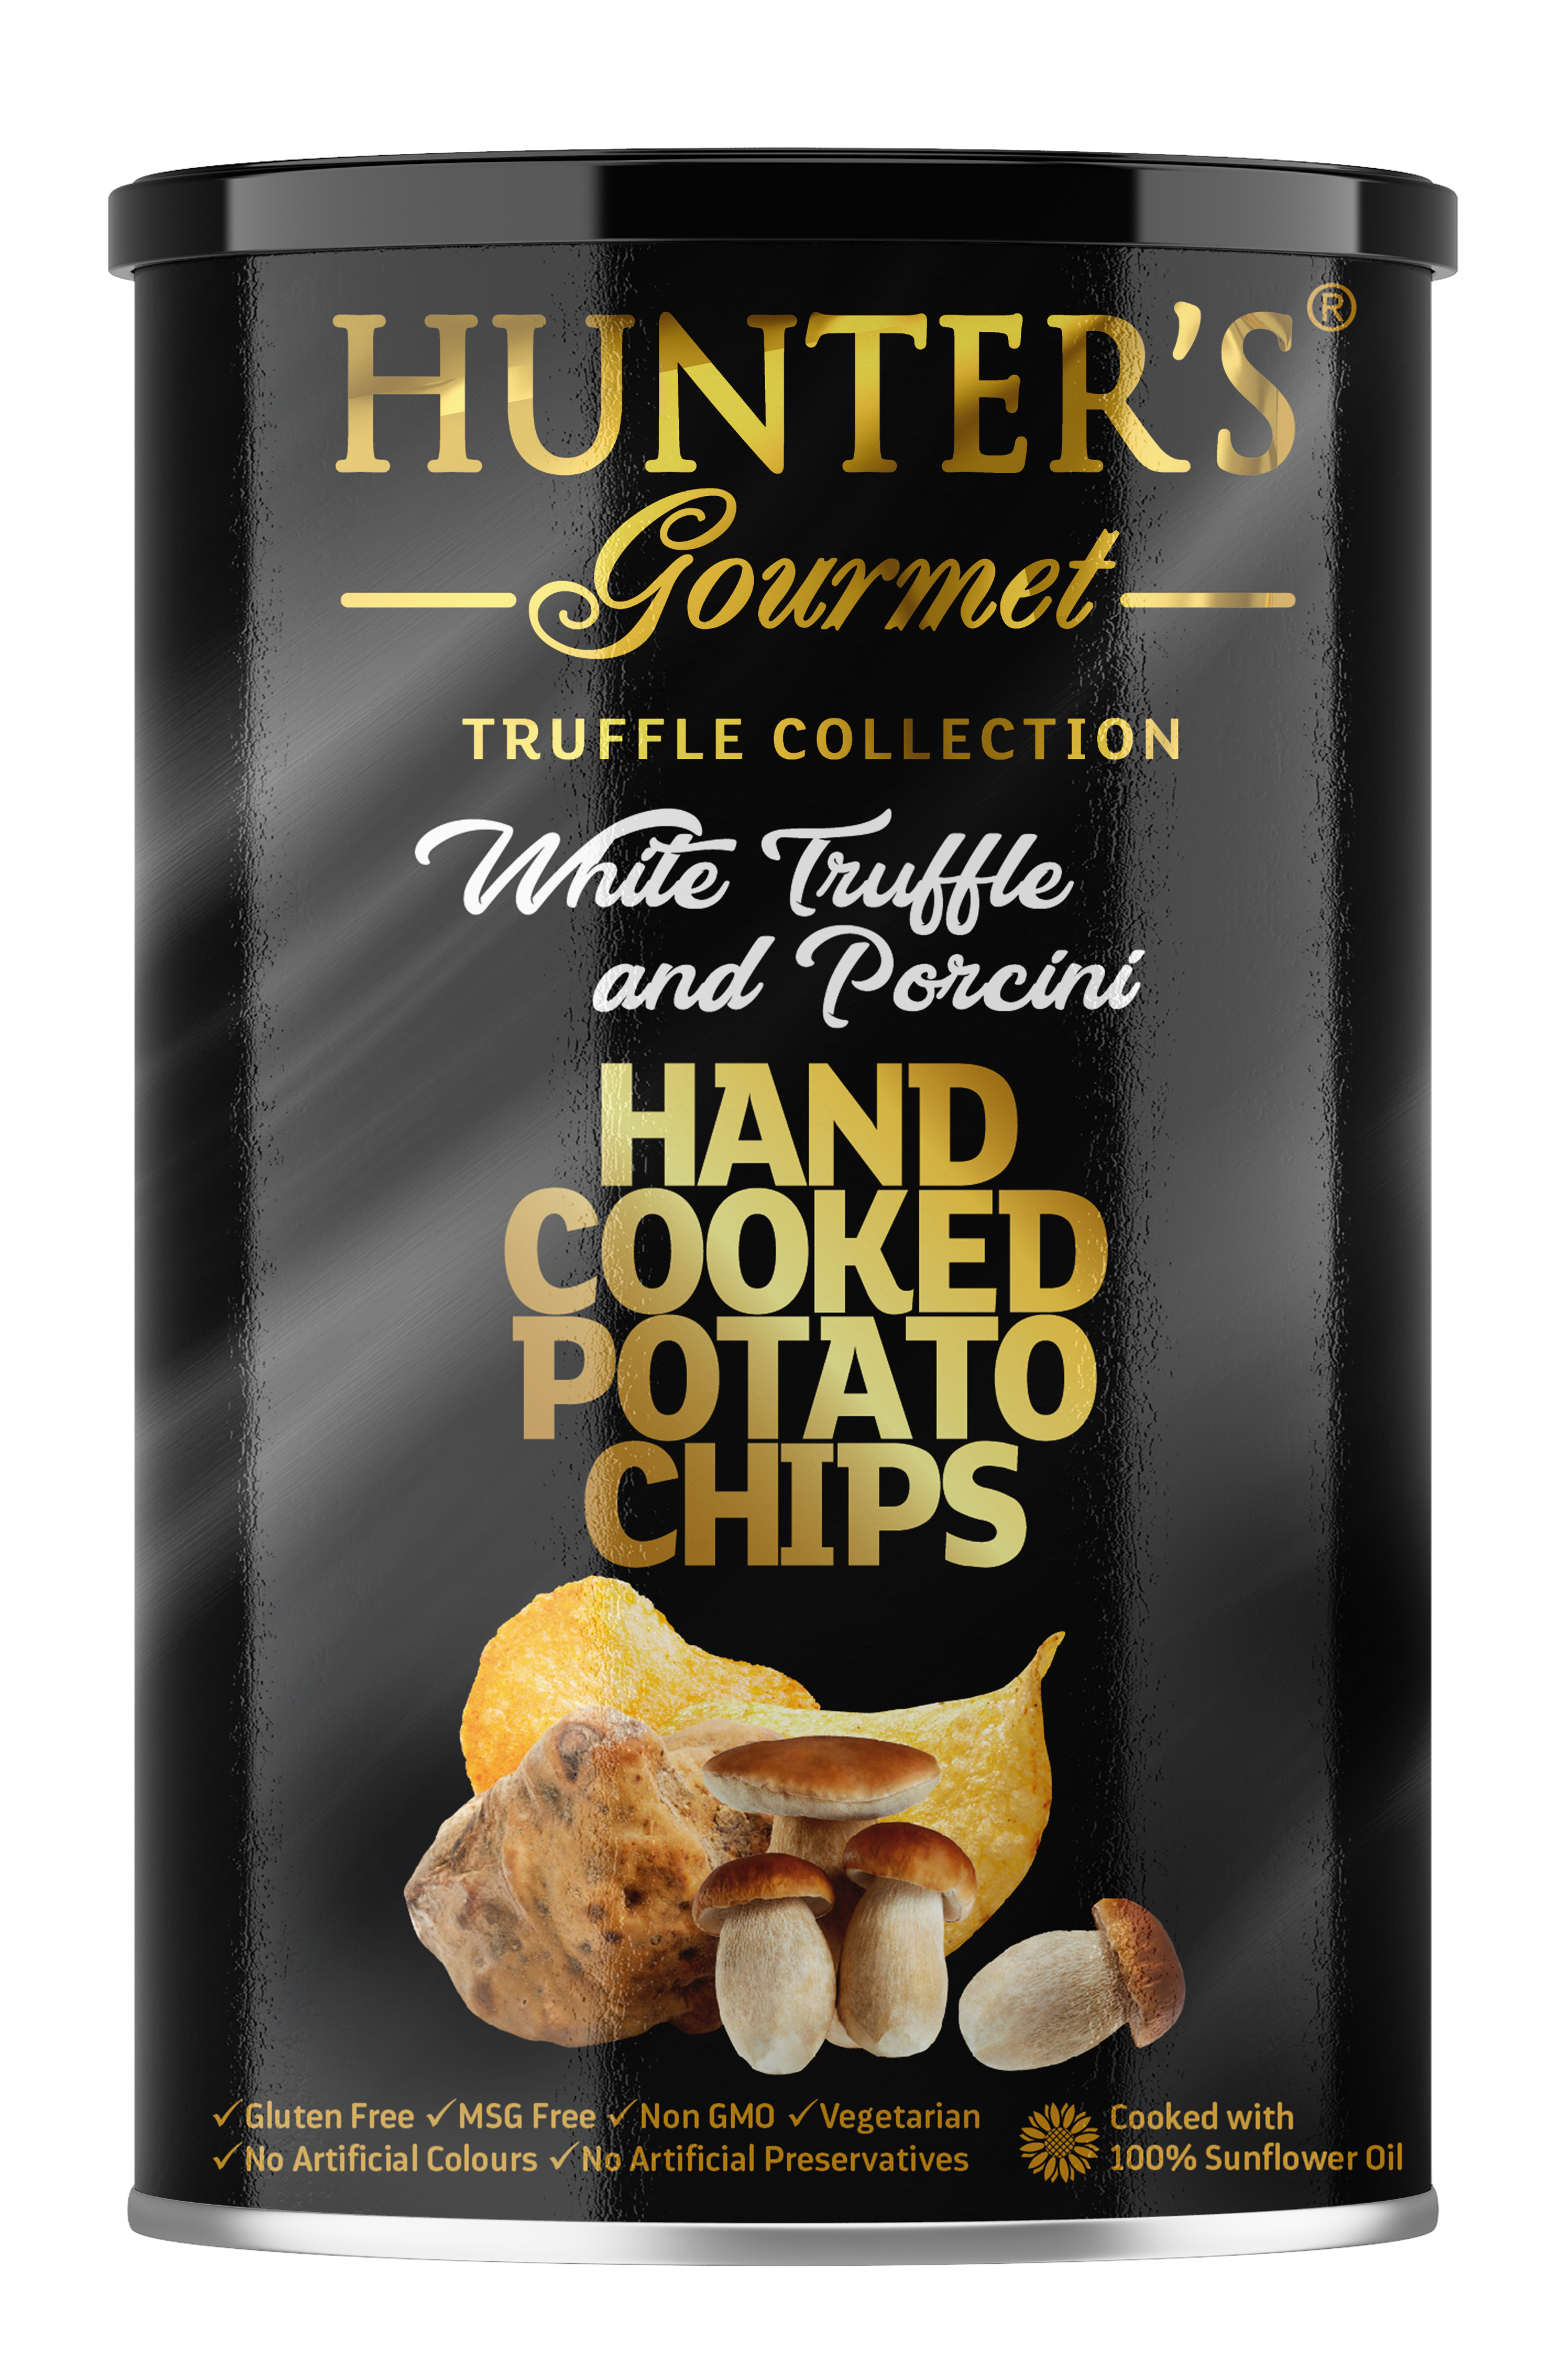 Hunter's Gourmet Hand Cooked Potato Chips White Truffle and Porcini 12 units per case 150 g